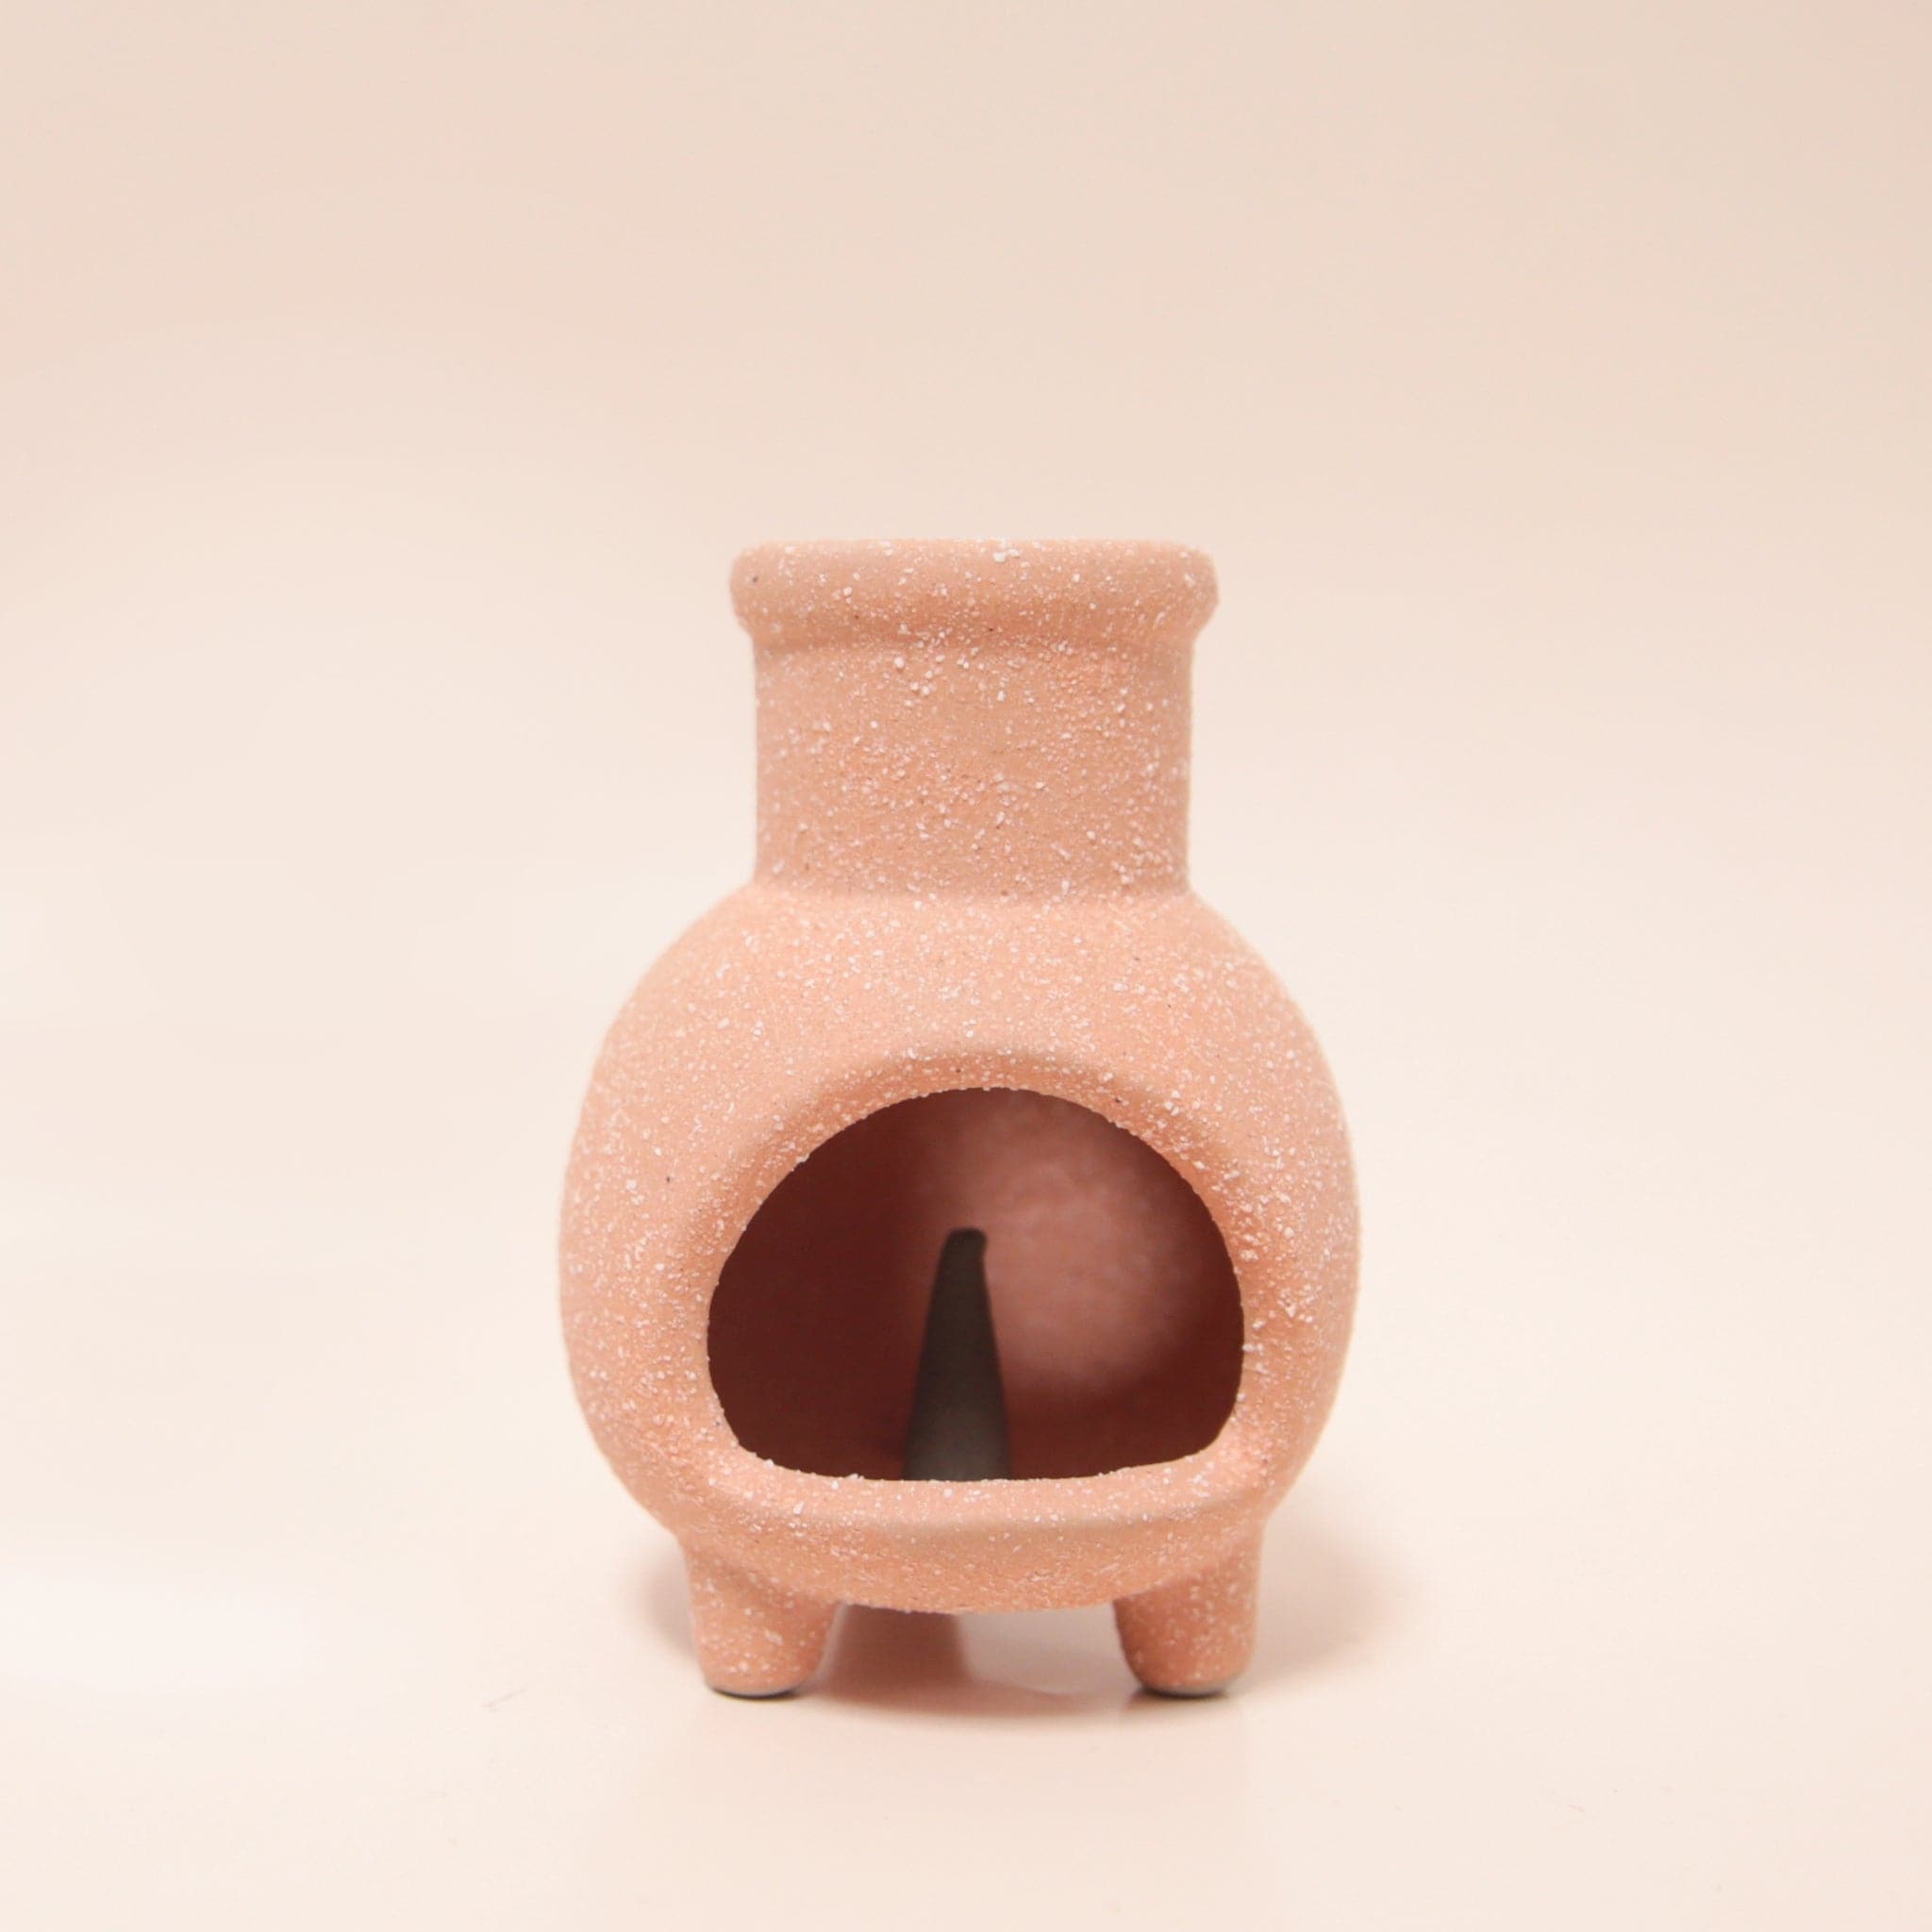 A tiny terracotta chiminea with legs and an opening for the incense cones to sit inside.